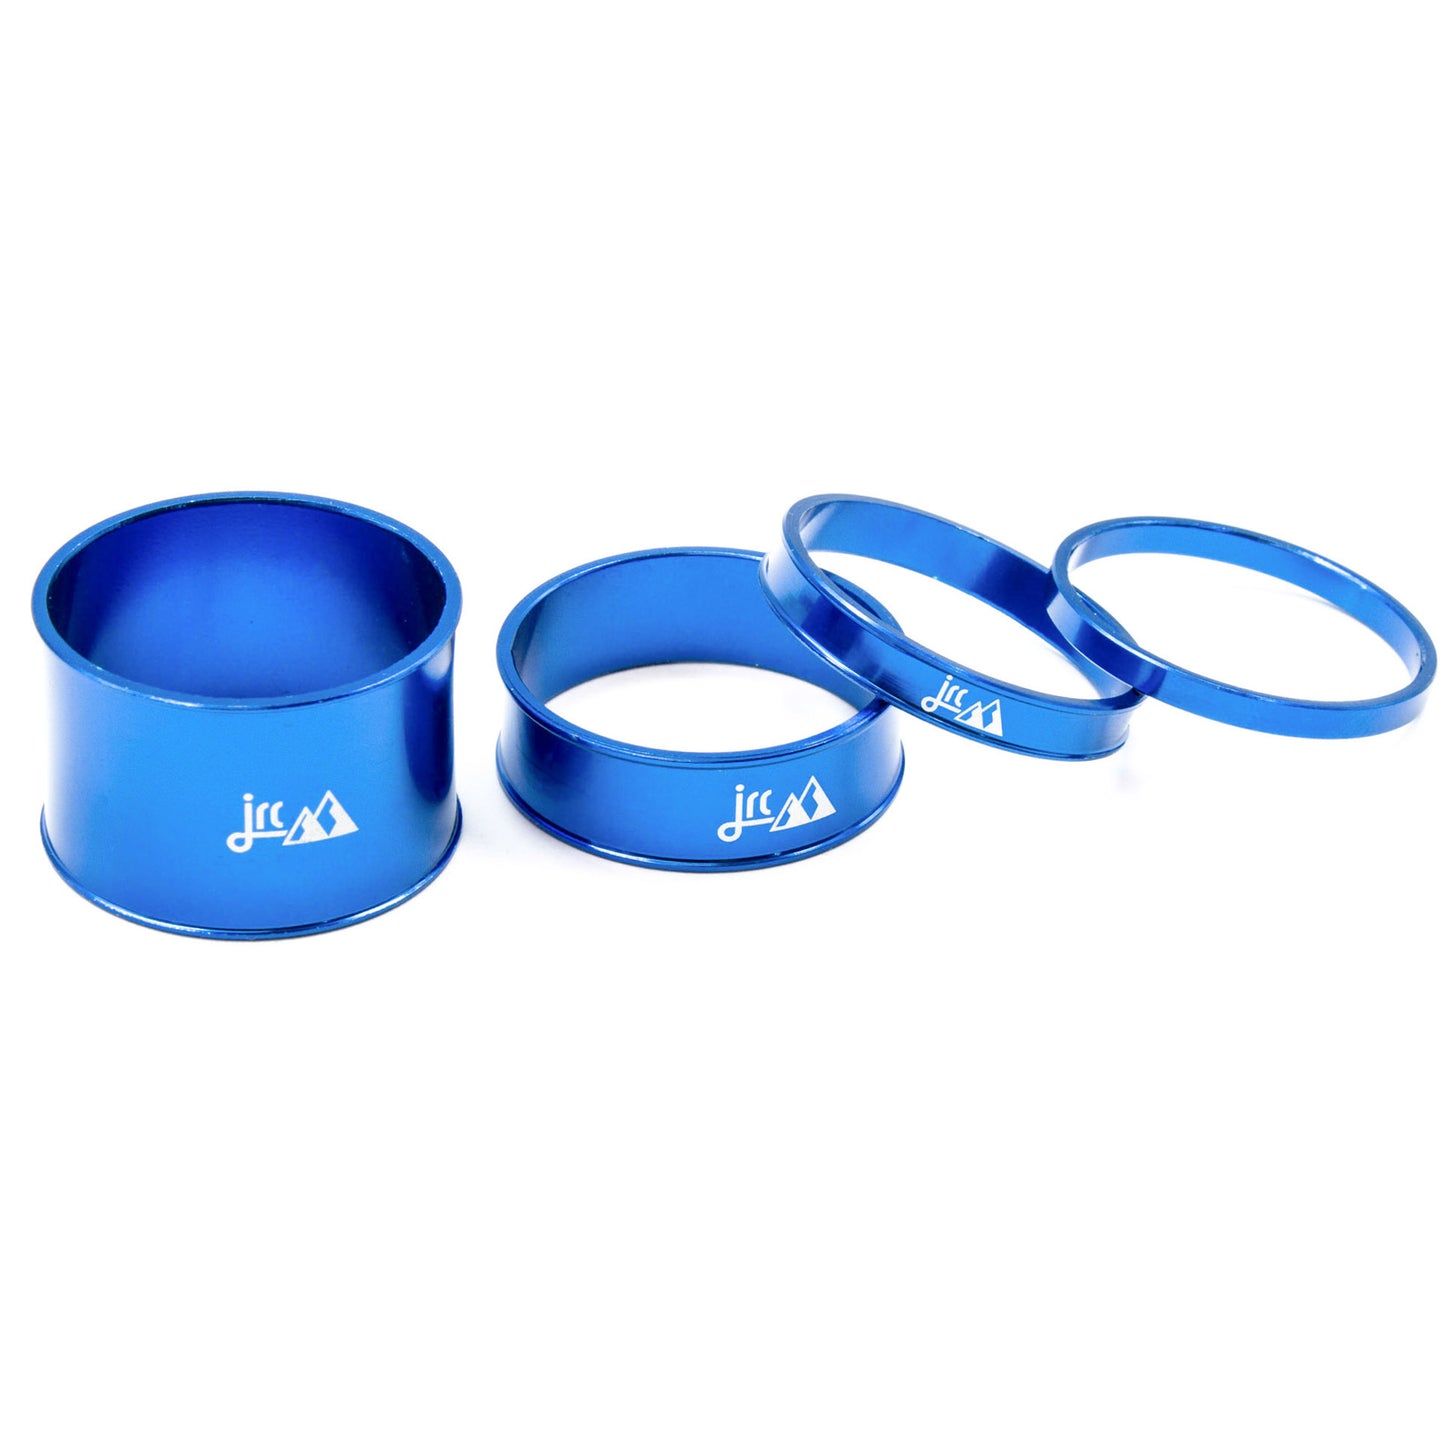 Blue, lightweight aluminium bicycle headset spacer kit with 4 sizes.